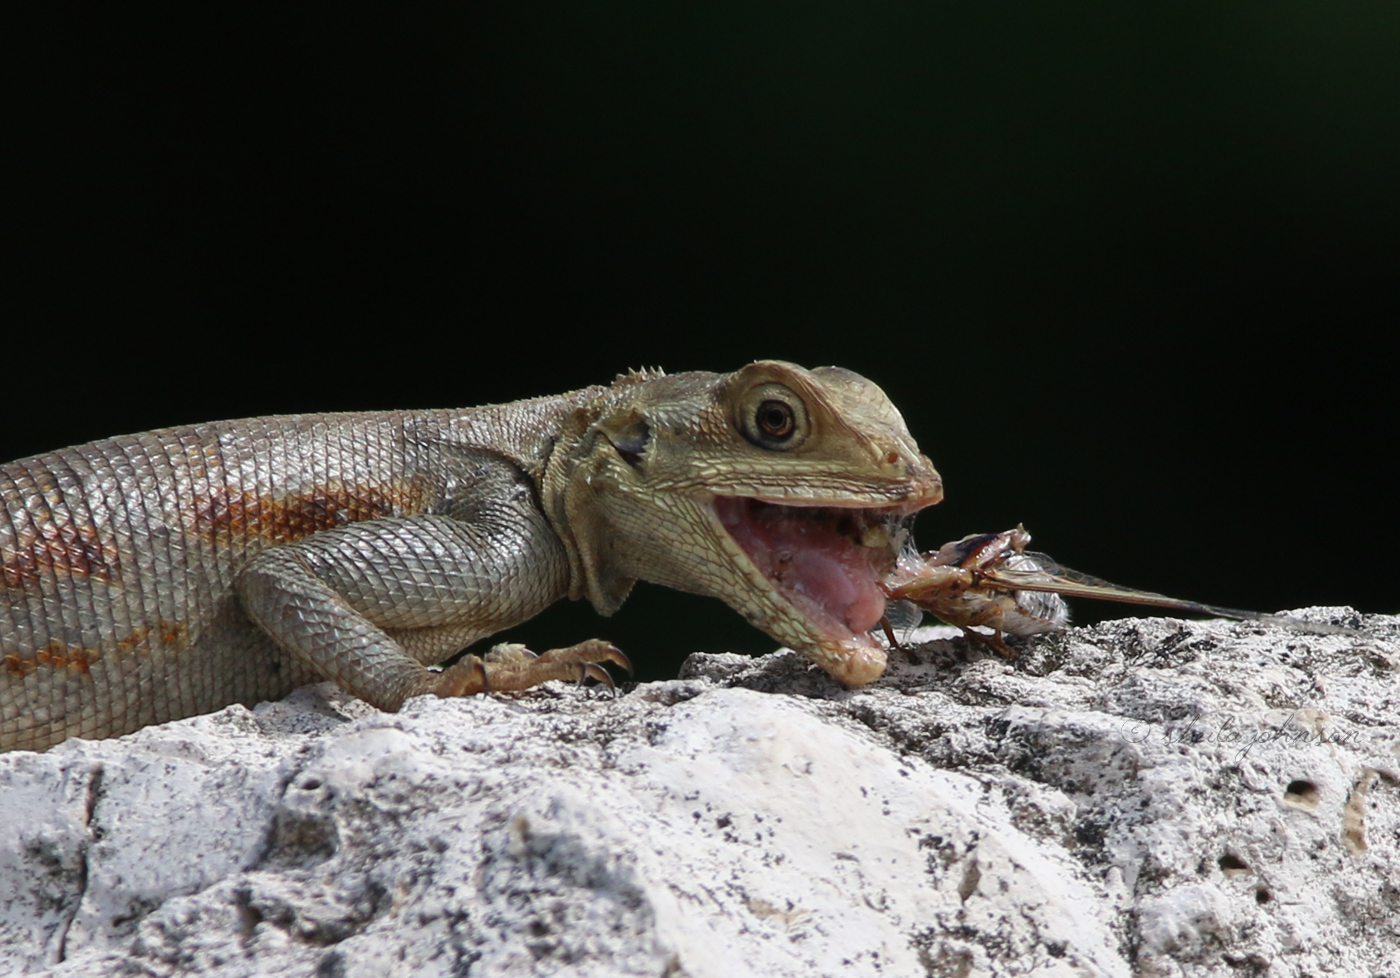 It&Amp;Amp;#039;S A Rare Thing To See The Agama Lizard Family At Kiplinger Preserve, Stuart, Florida Feasting. Of All Things, To See This One Feasting On A Cicada Surely Must Be Even More Rare!